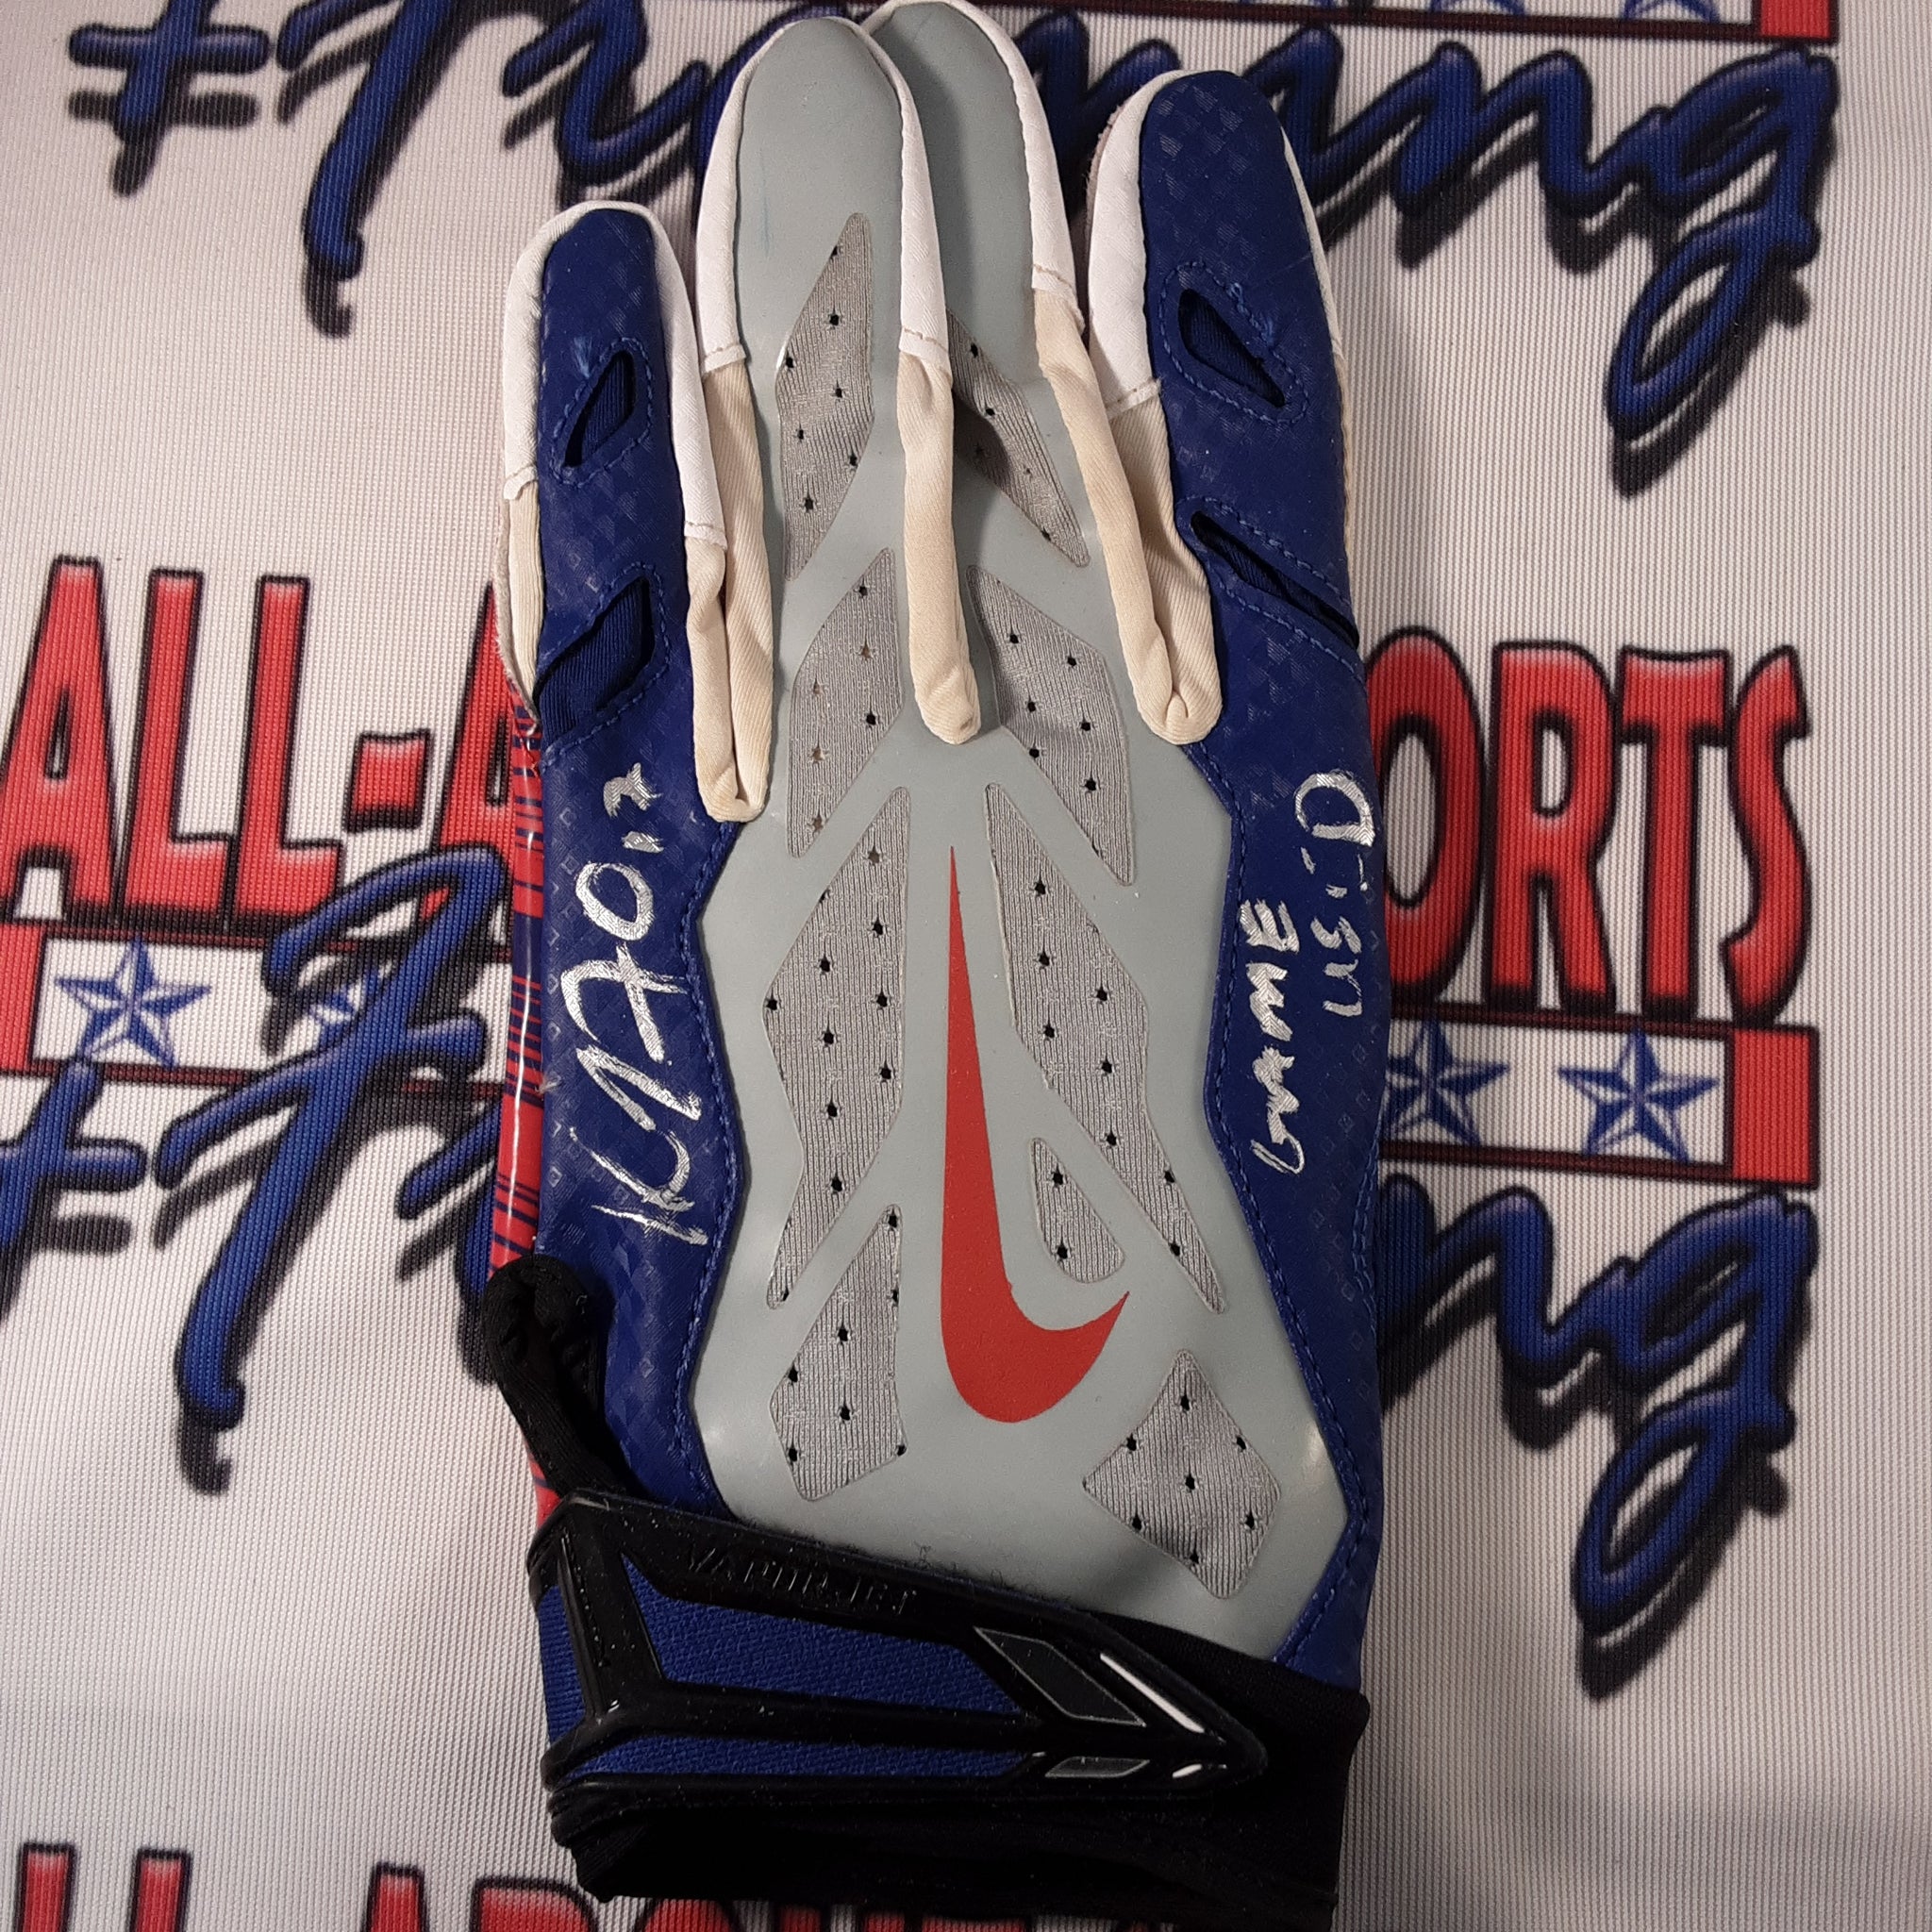 Dwayne Harris Authentic Game Used Signed Glove Autographed JSA